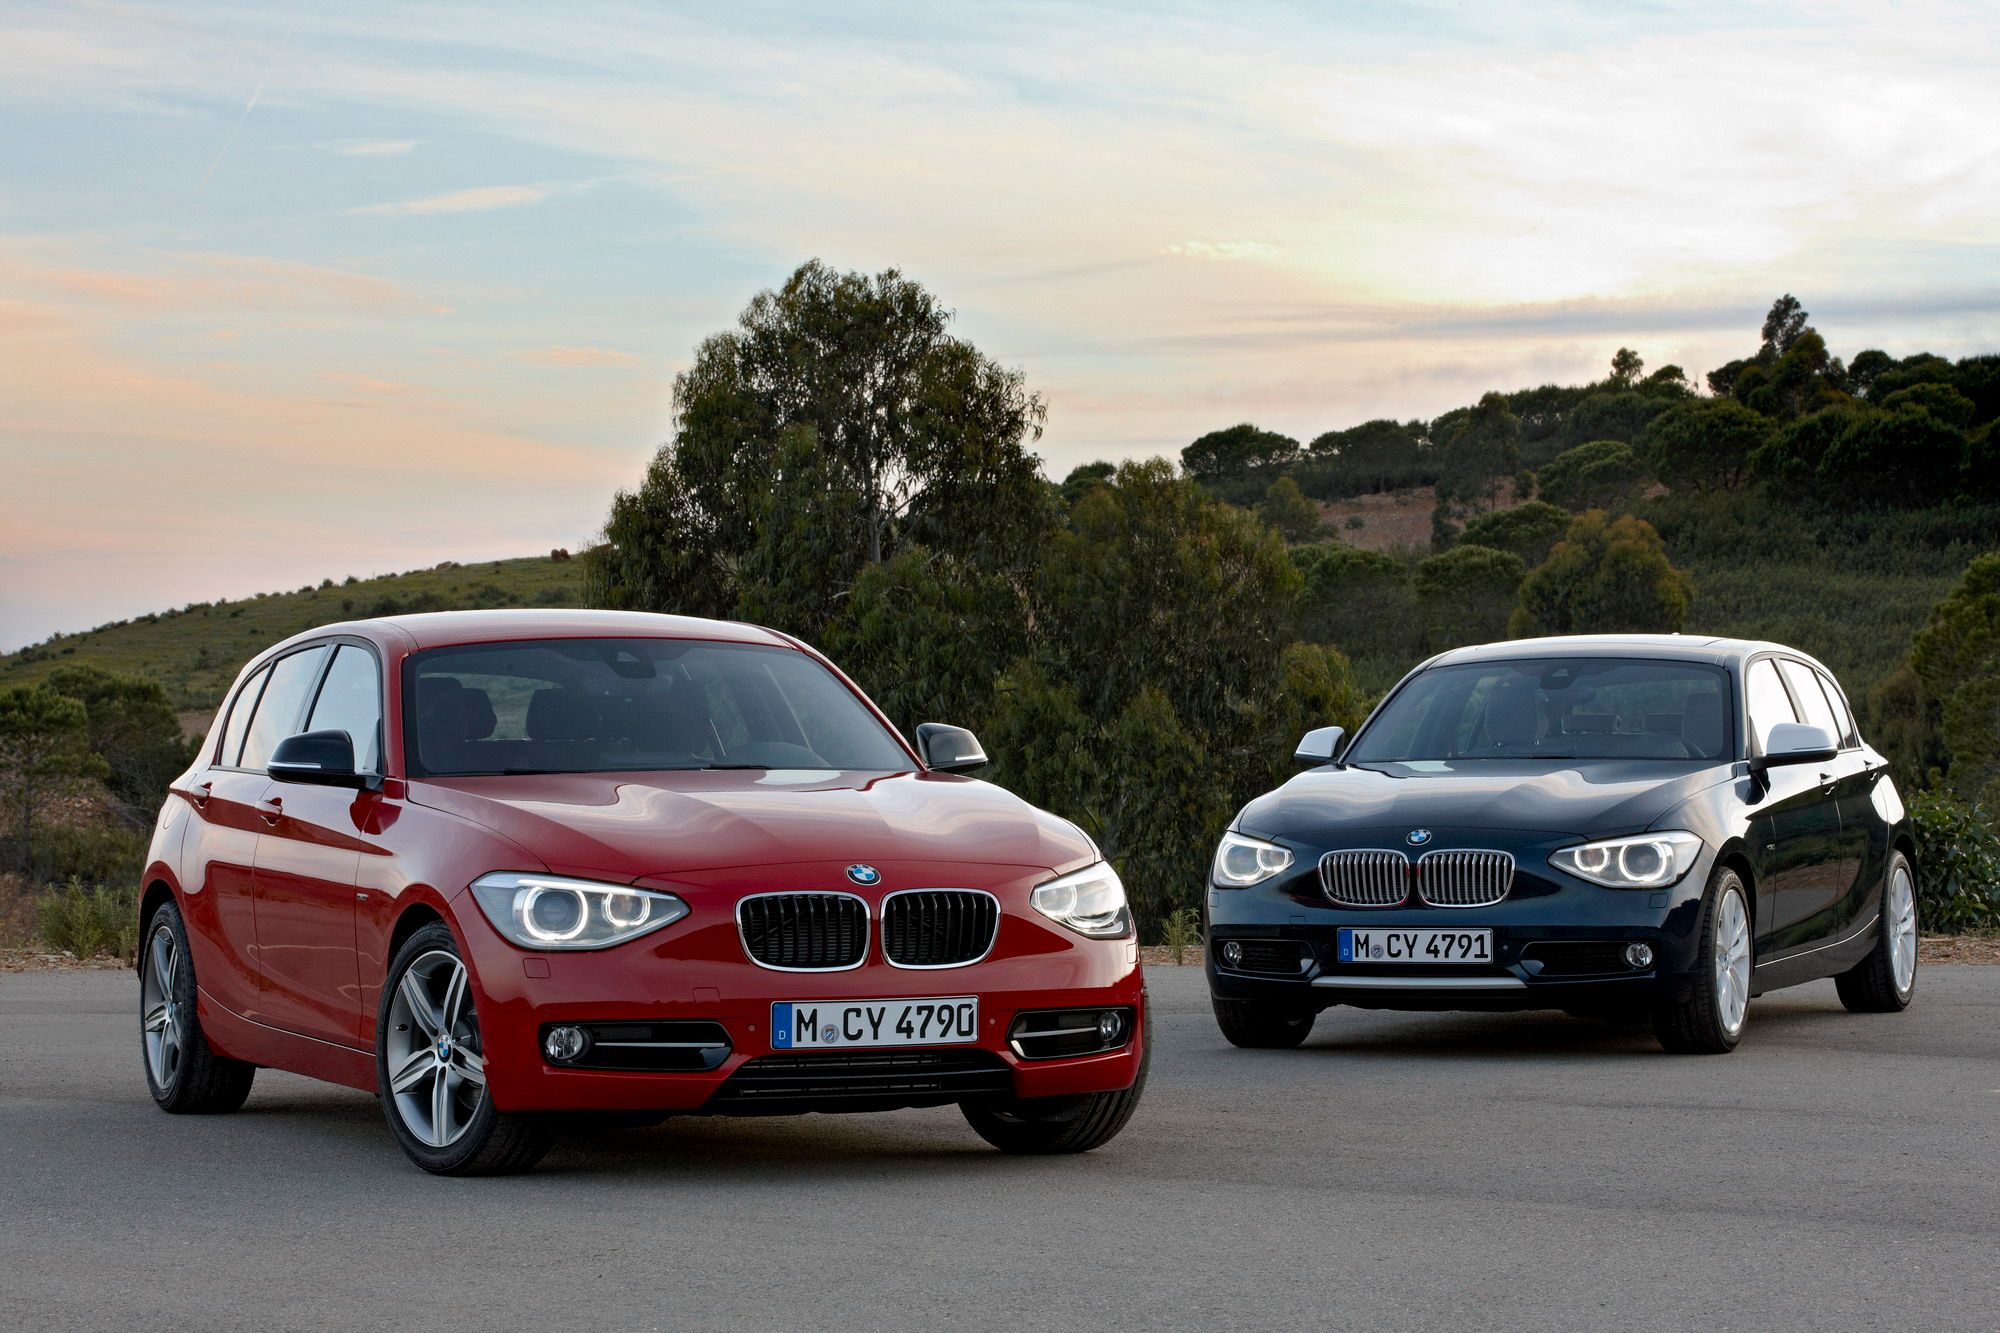 F20 BMW 1 Series gets updated interior, revised kit 